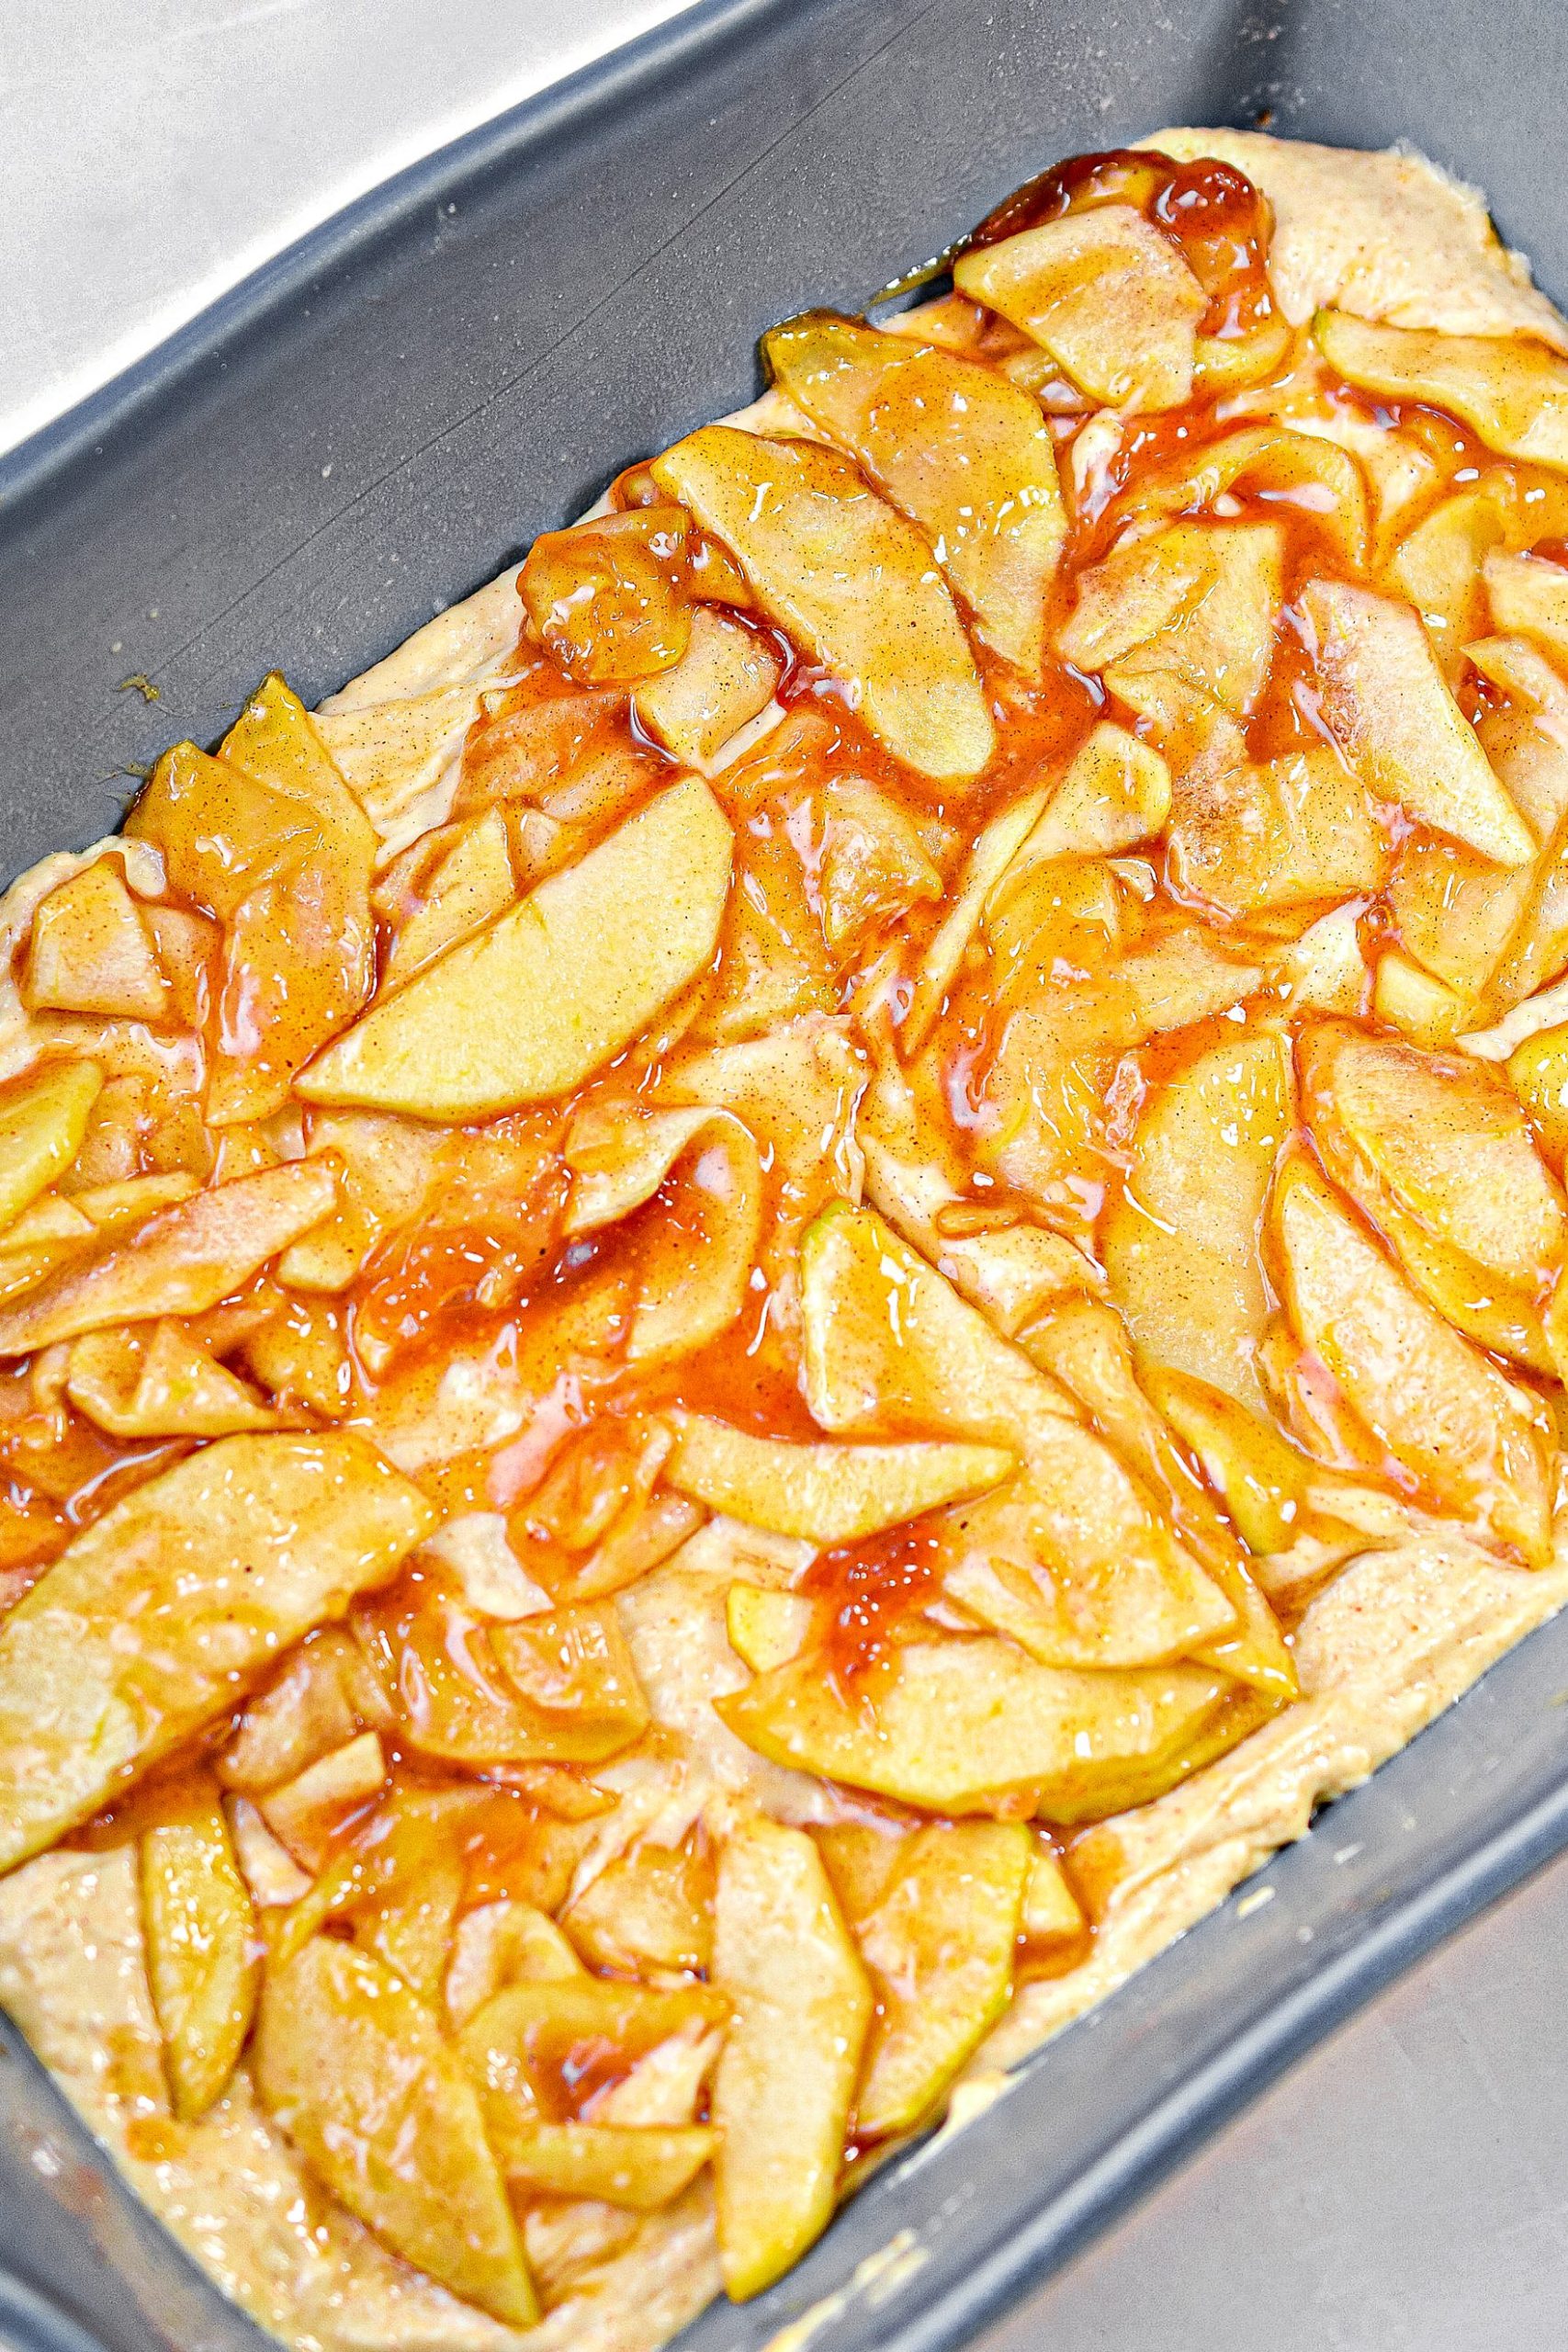 Cover the batter with the apple filling, and sprinkle ¾ of the brown sugar mixture on top of them.